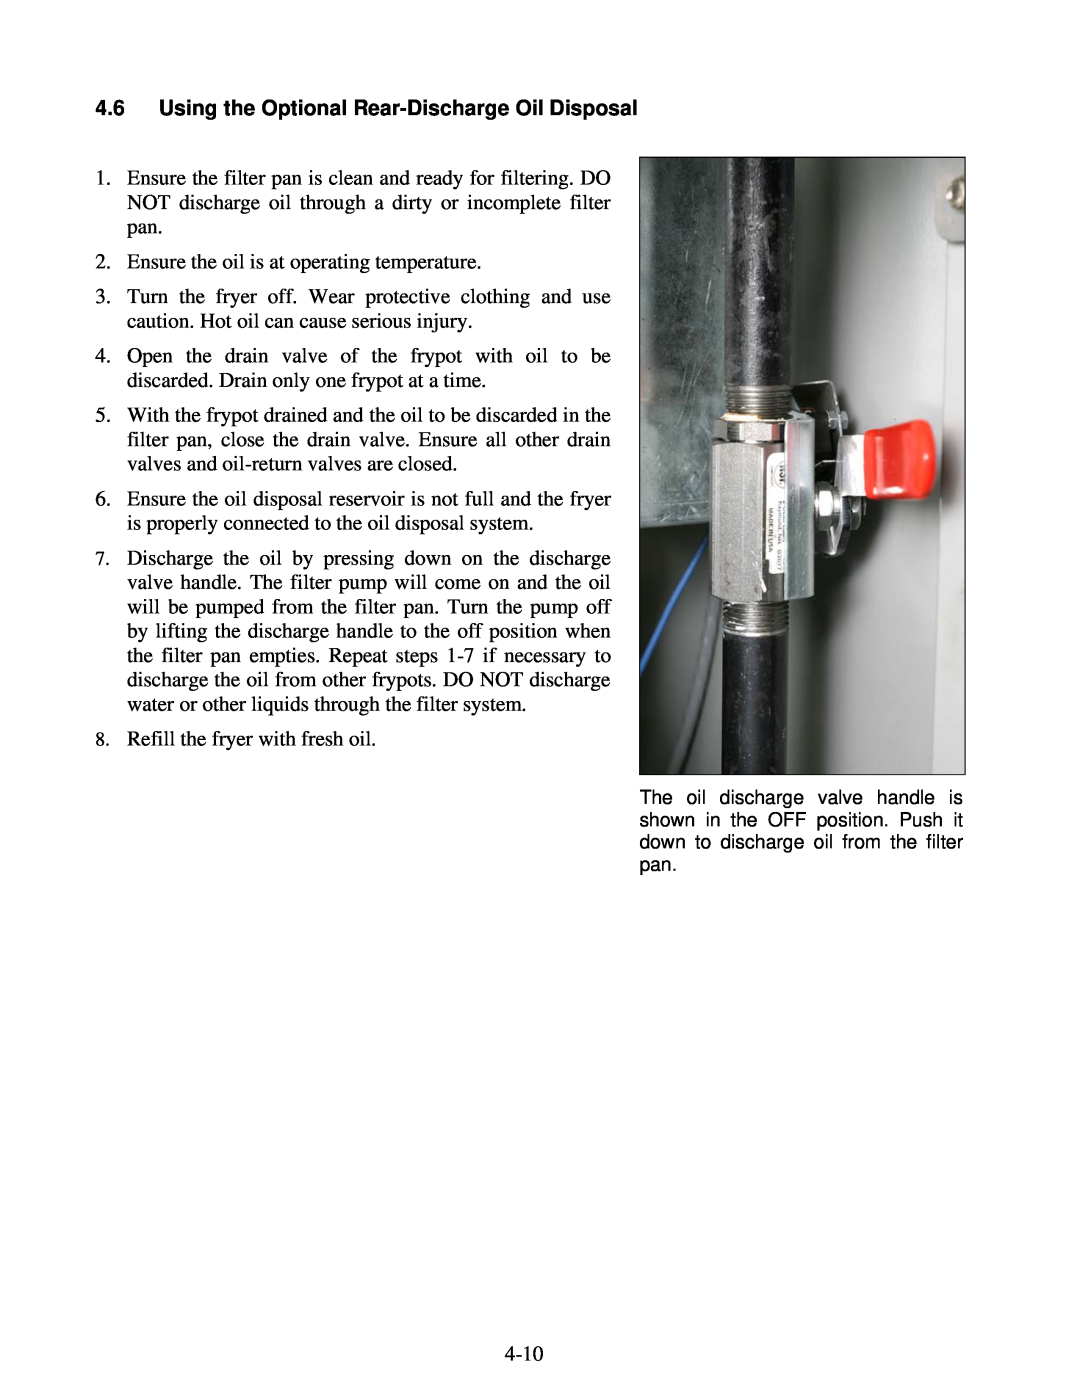 Frymaster H55 operation manual 4.6Using the Optional Rear-DischargeOil Disposal 